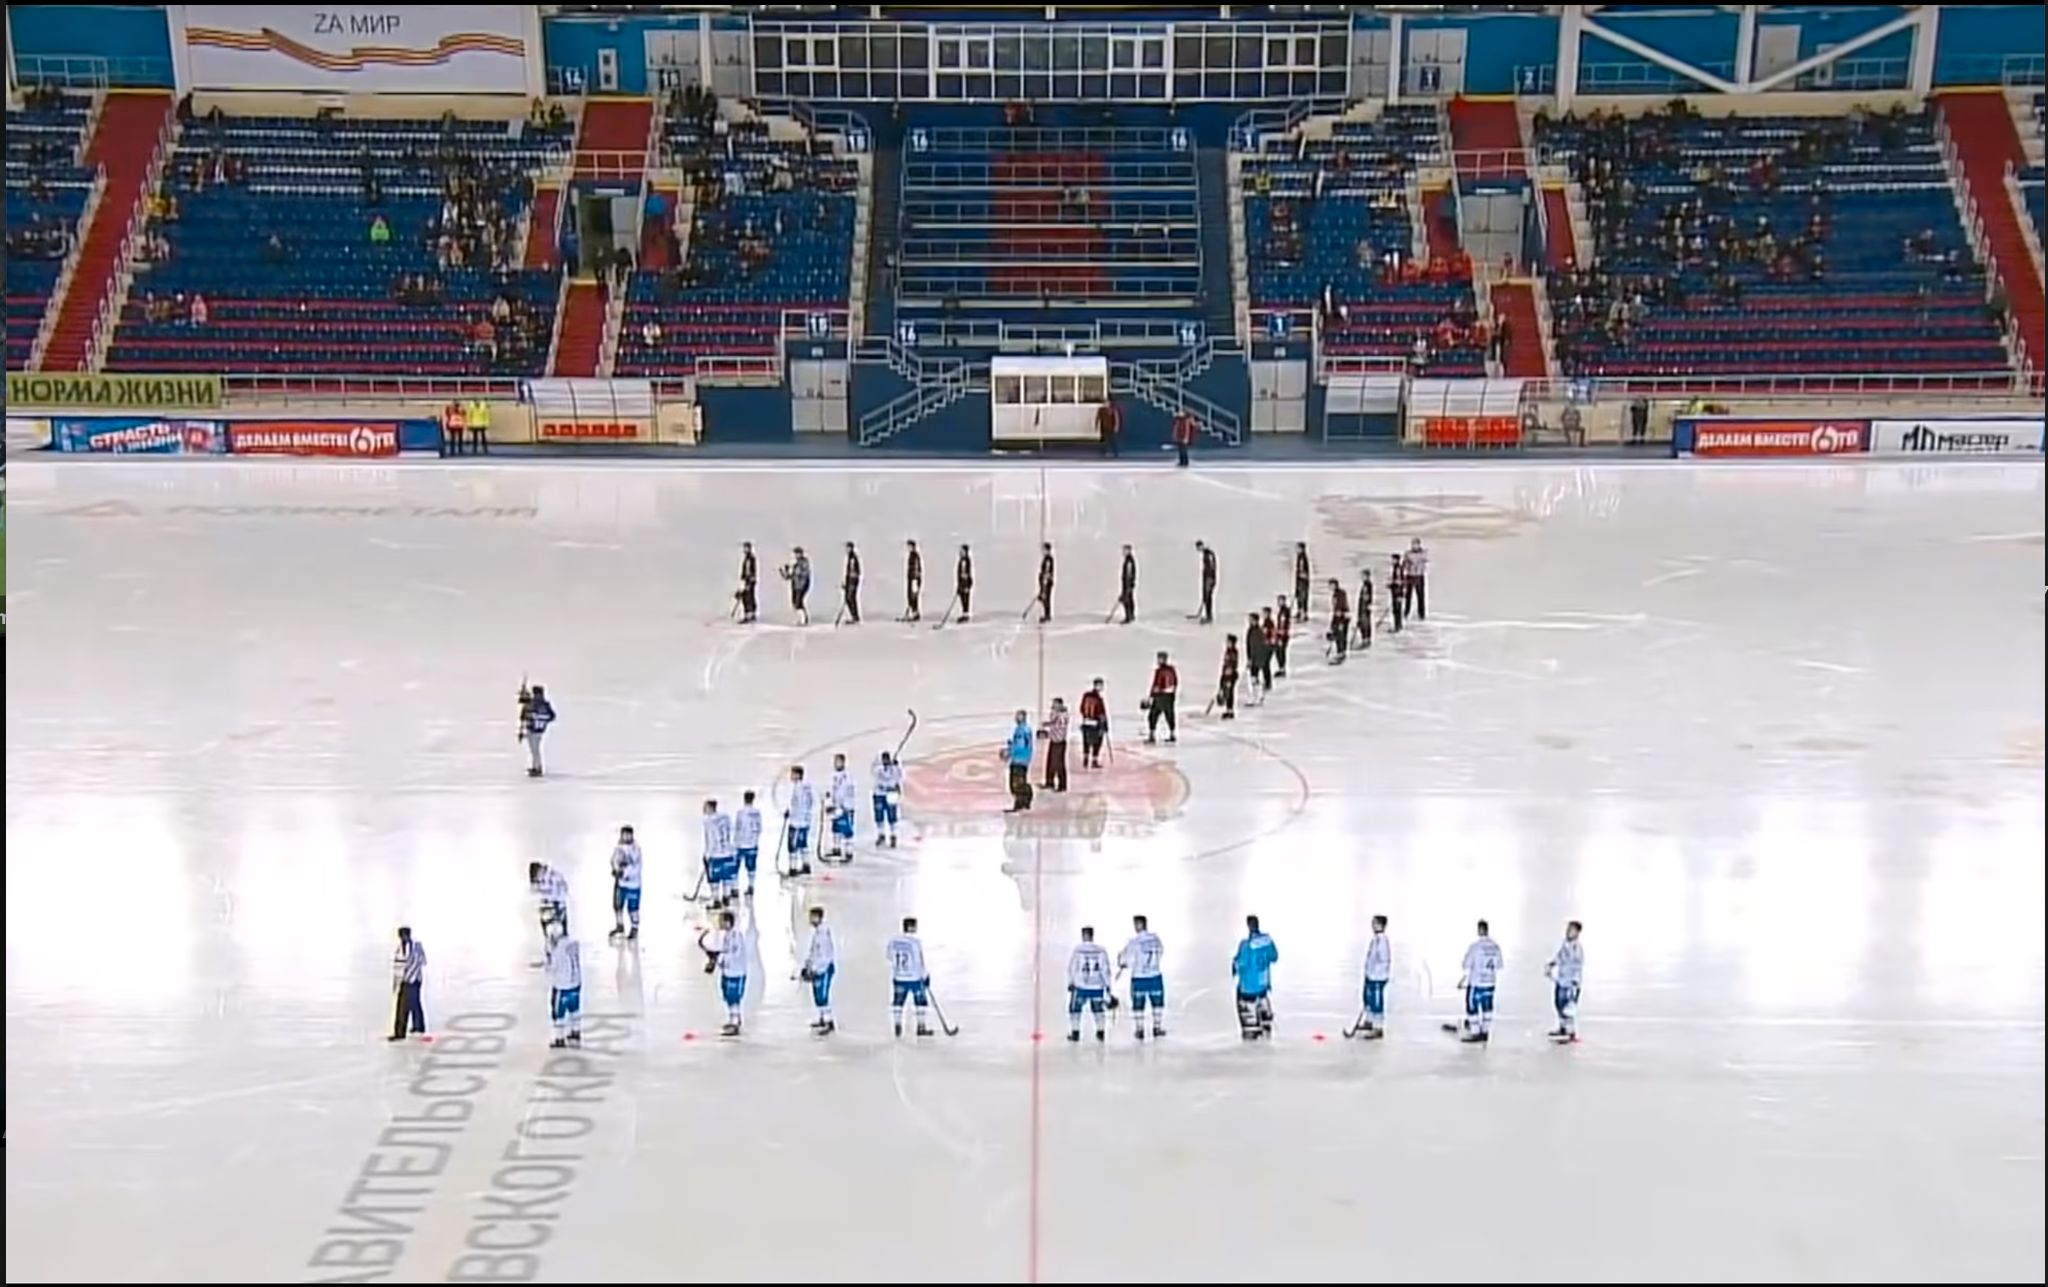 Russian bandy team line up in Z formation in support of Putin